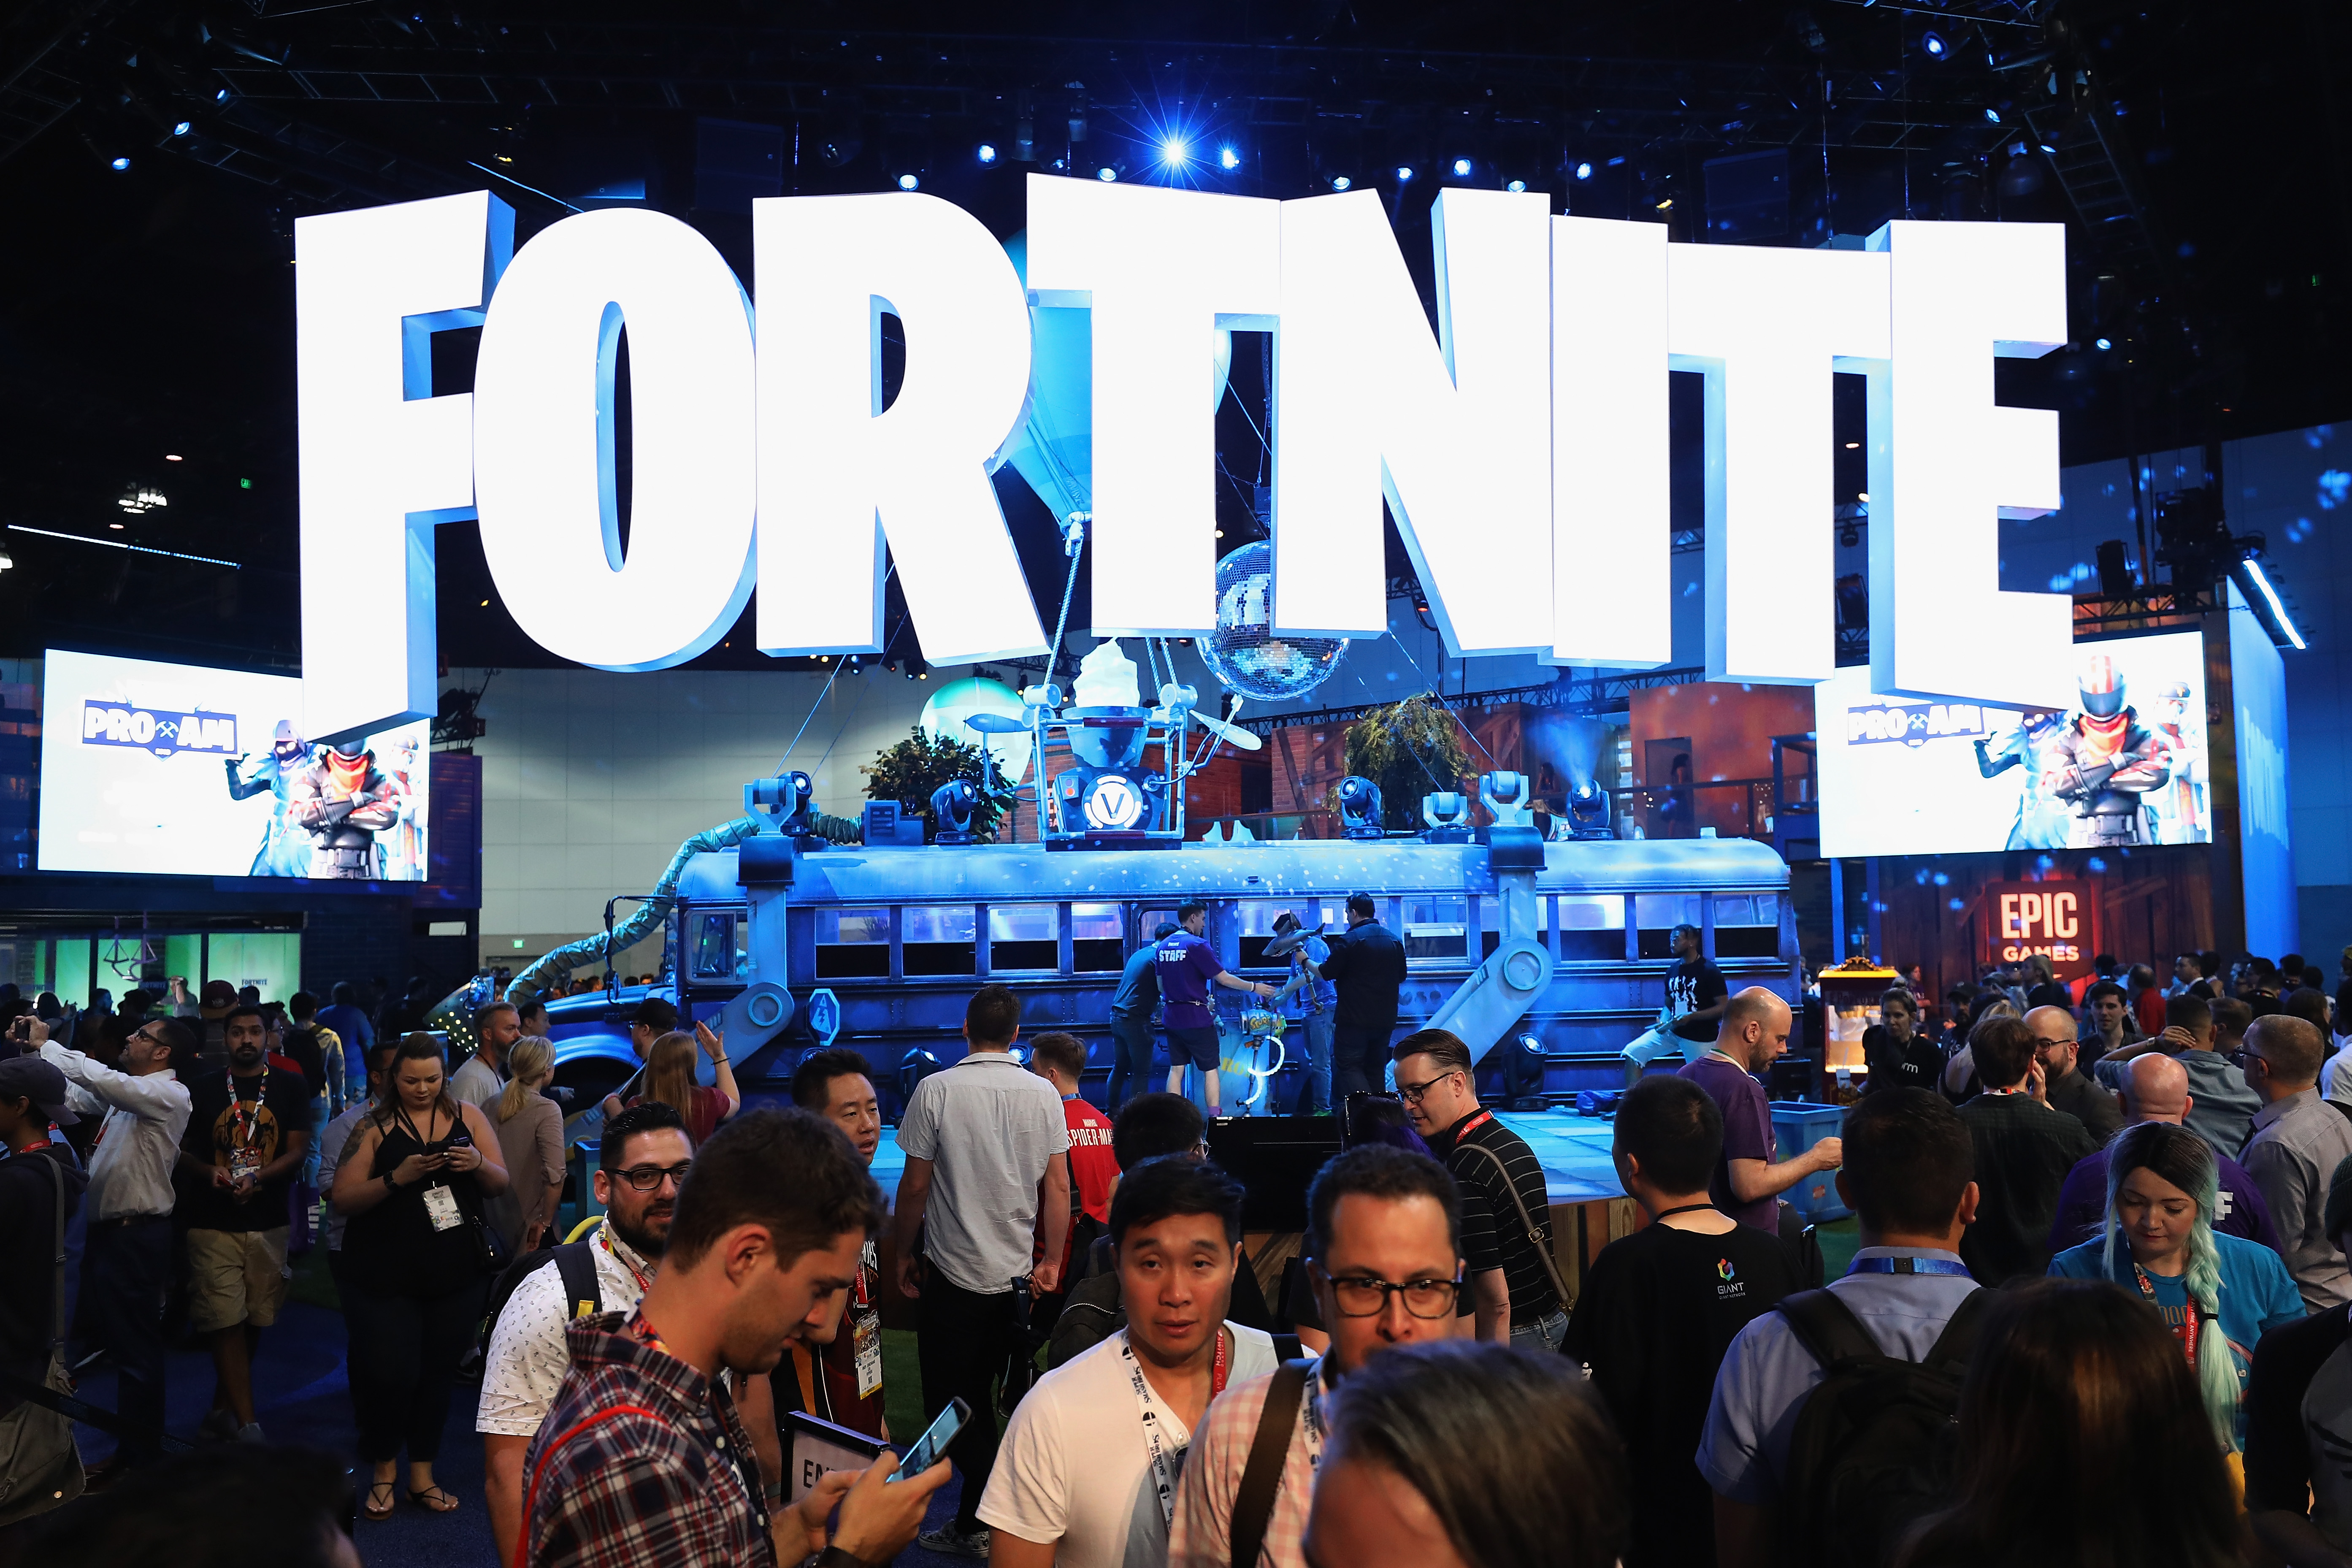 Epic Games launches Fortnite on the Google Play Store and they're